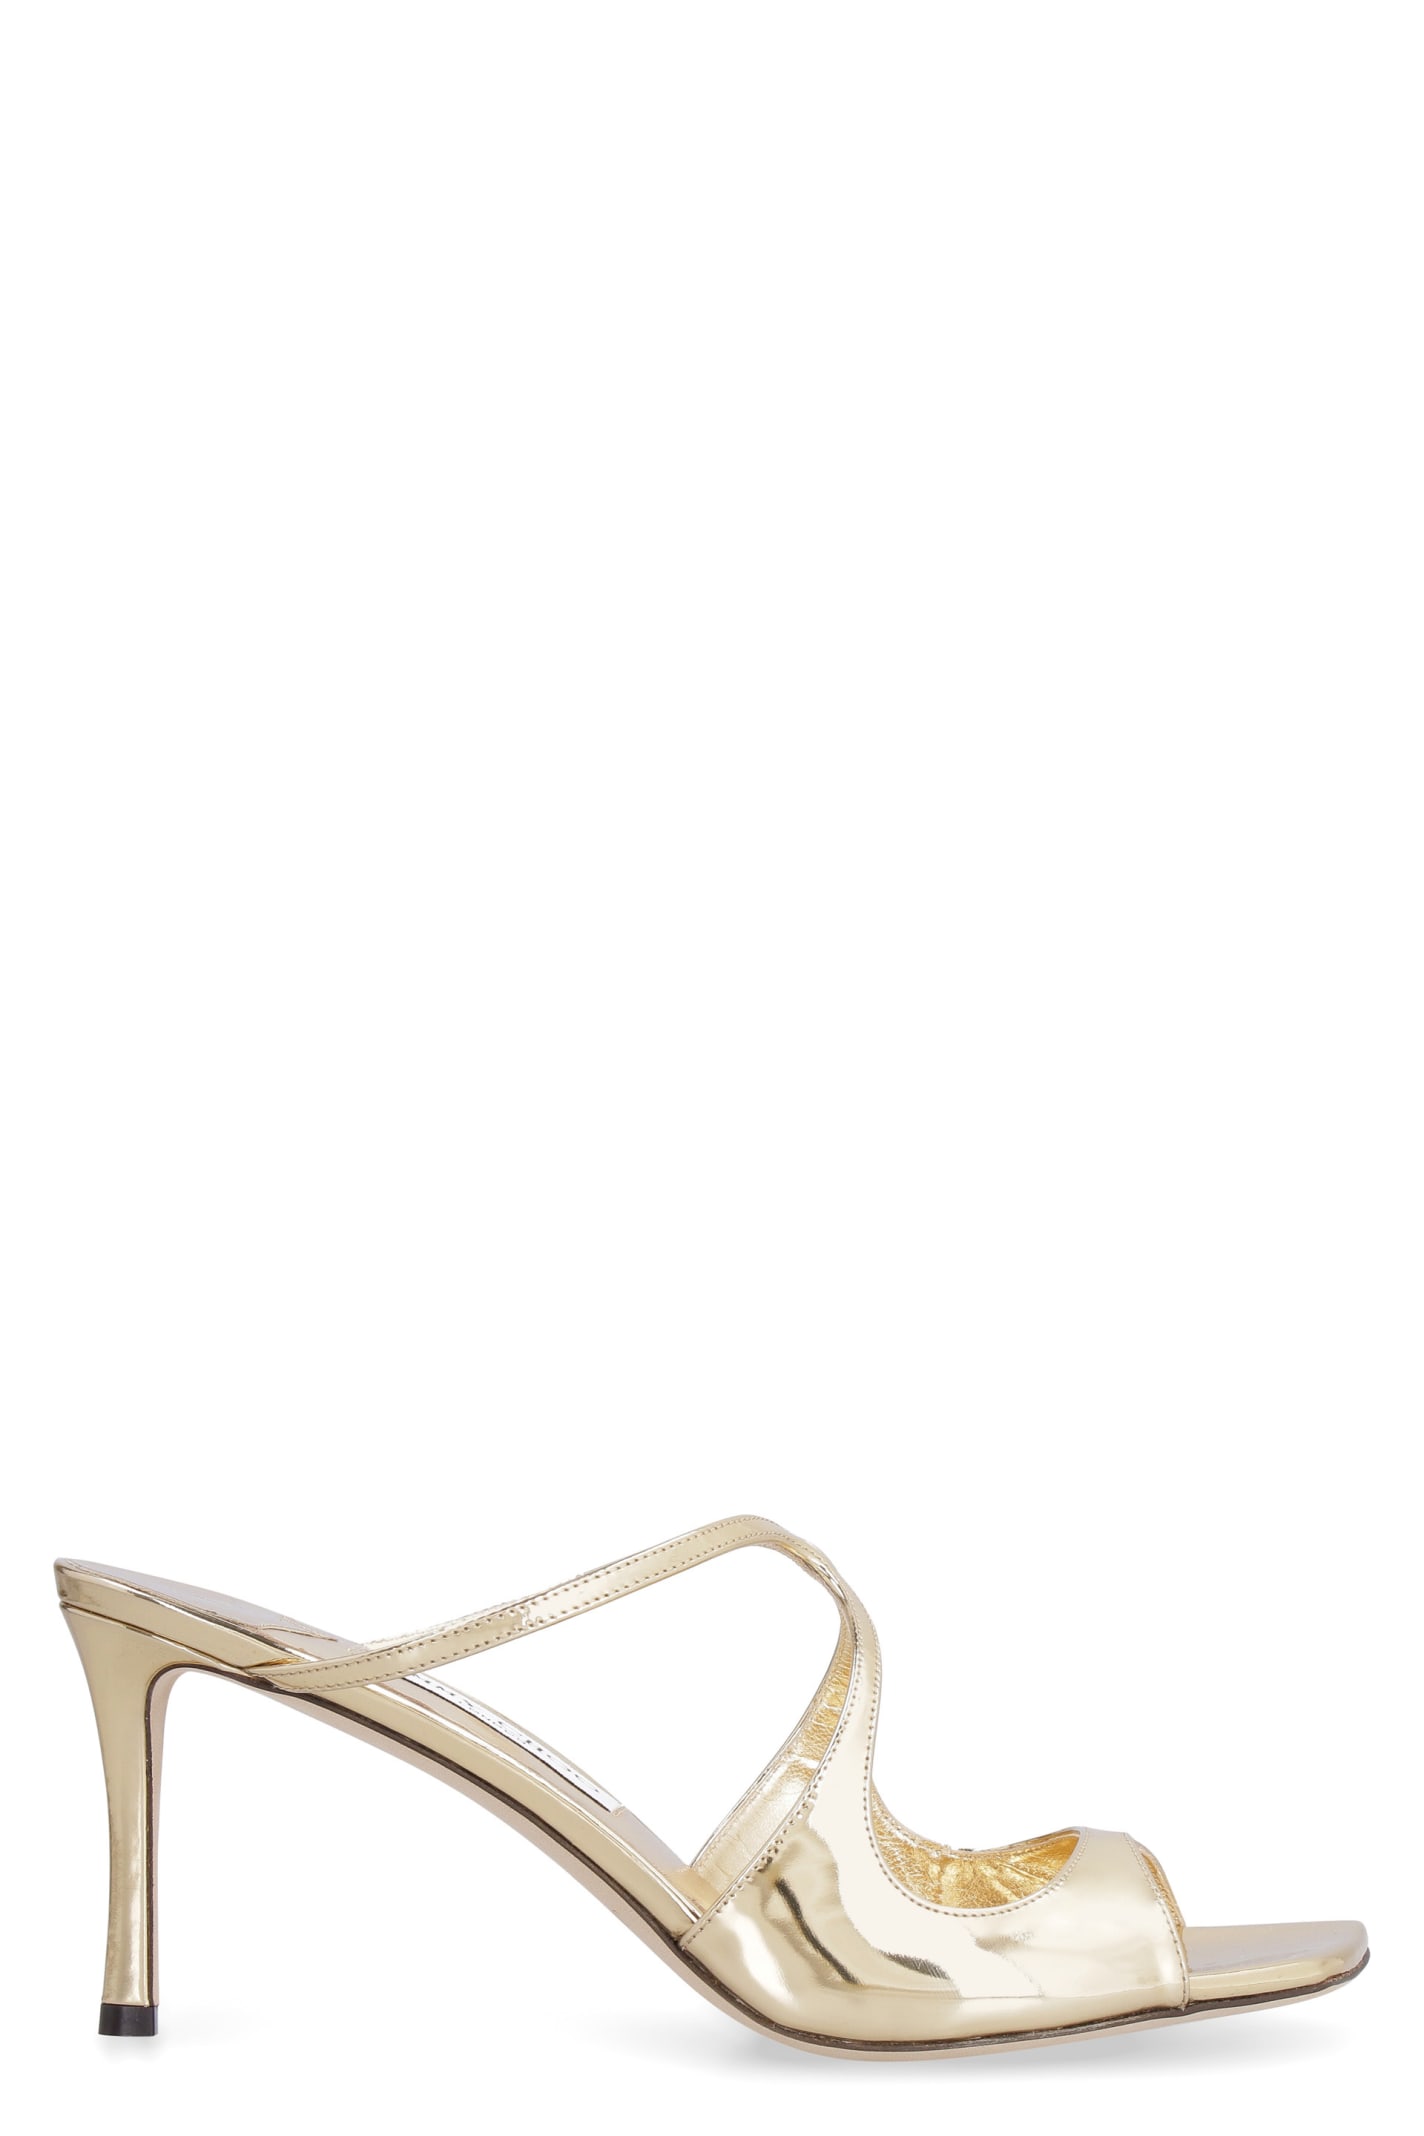 Jimmy Choo Anise Leather Mules